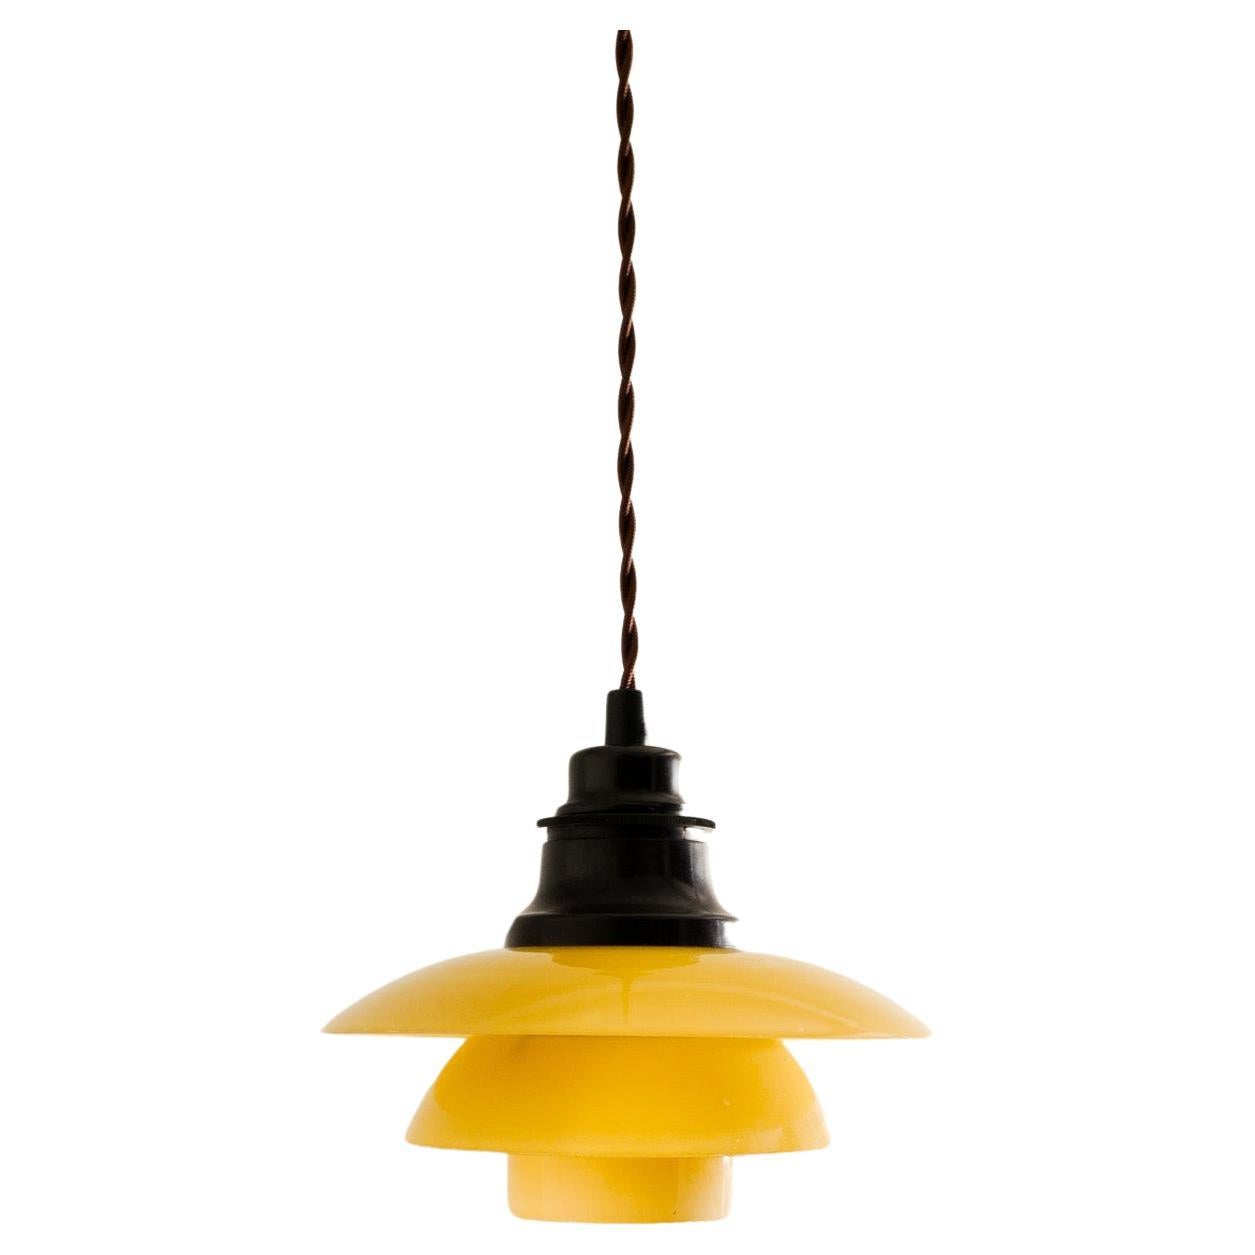 Early Yellow Poul Henningsen "PH 2/2" Mid Century Pendant by Louis Poulsen 1930s For Sale